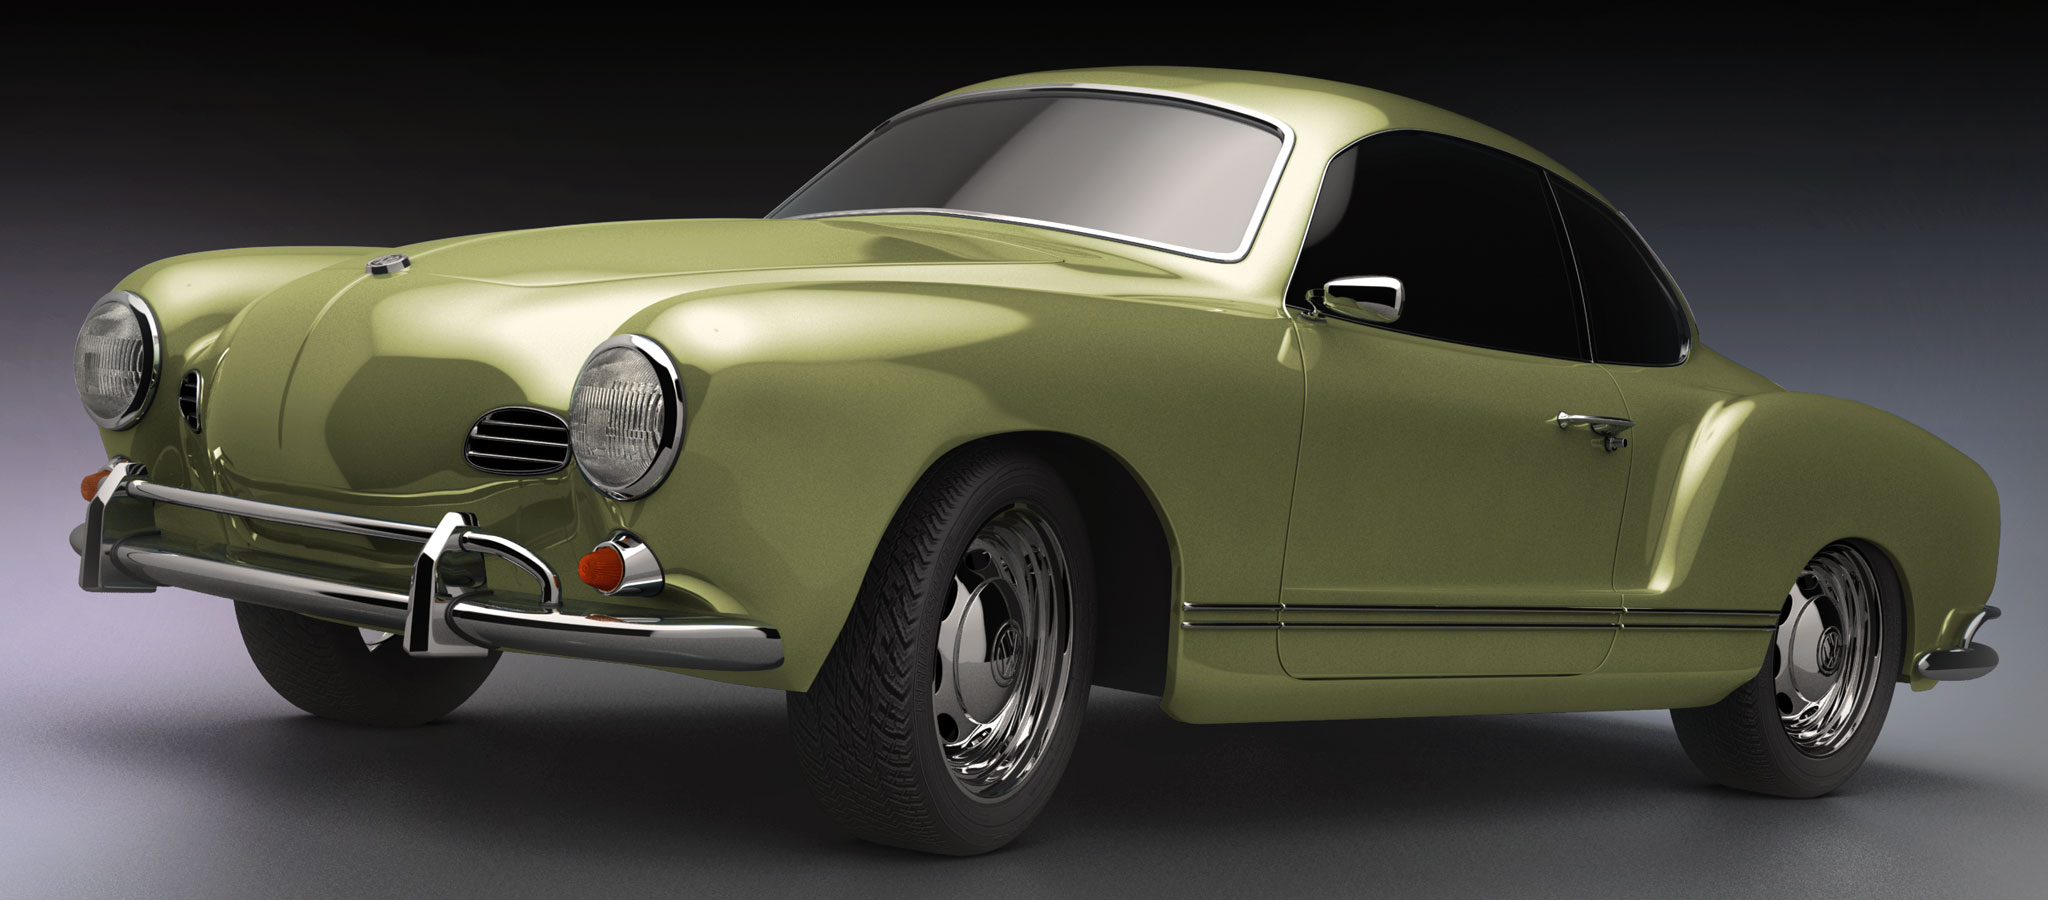 A 3D model and render of a 1969 Volkswagen Karmann Ghia.